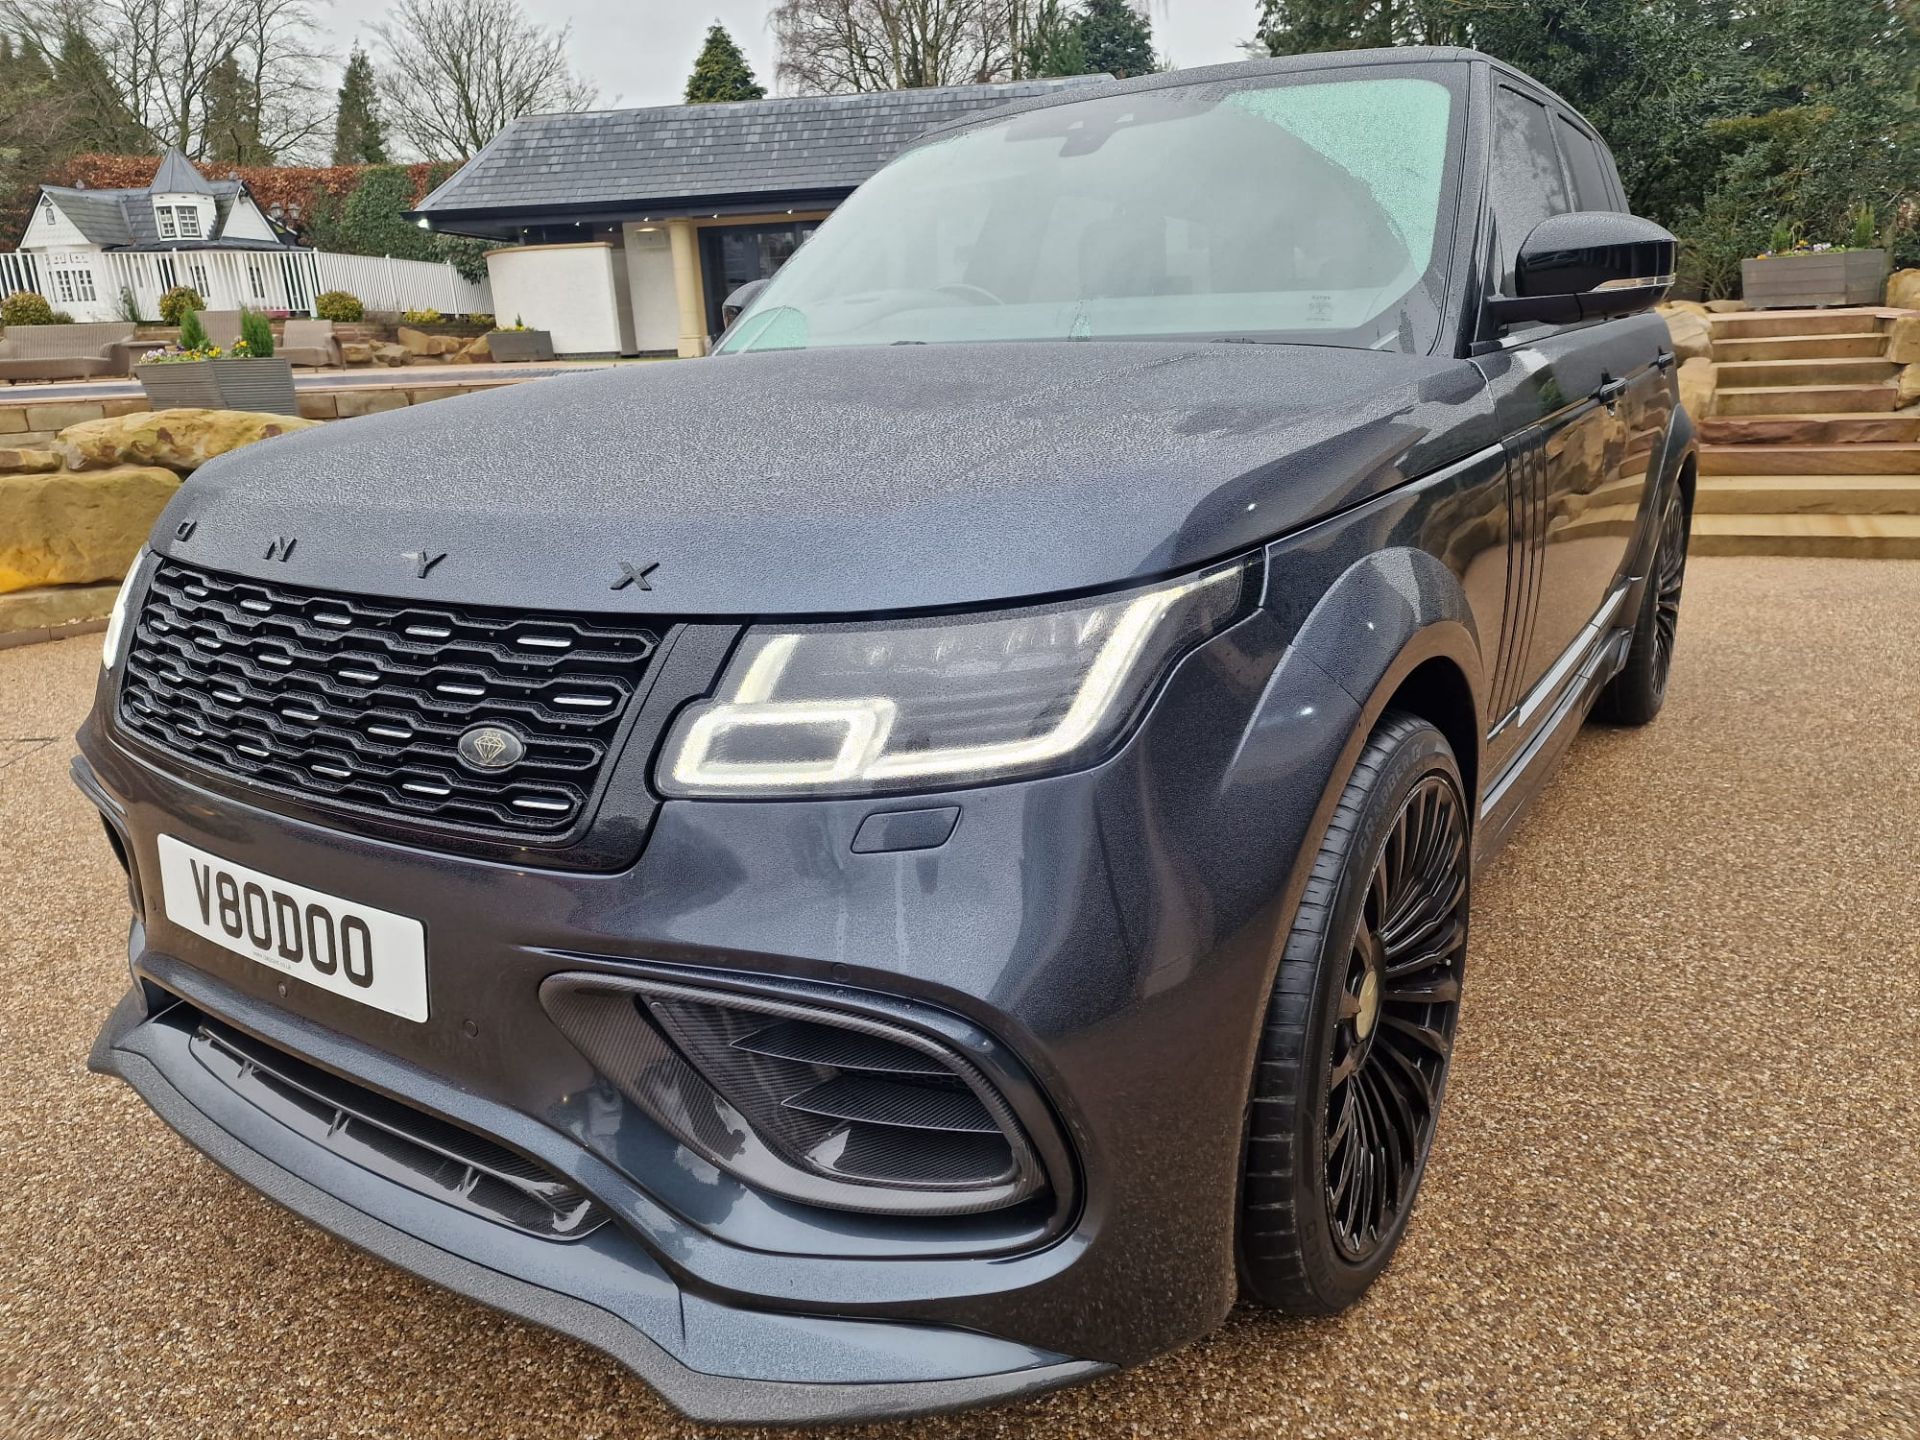 2018/68 RANGE ROVER SV AUTOBIOGRAPHY DYN V8 SC AUTO - £40K WORTH OF ONYX BODY KIT AND CONVERSION - Image 8 of 77